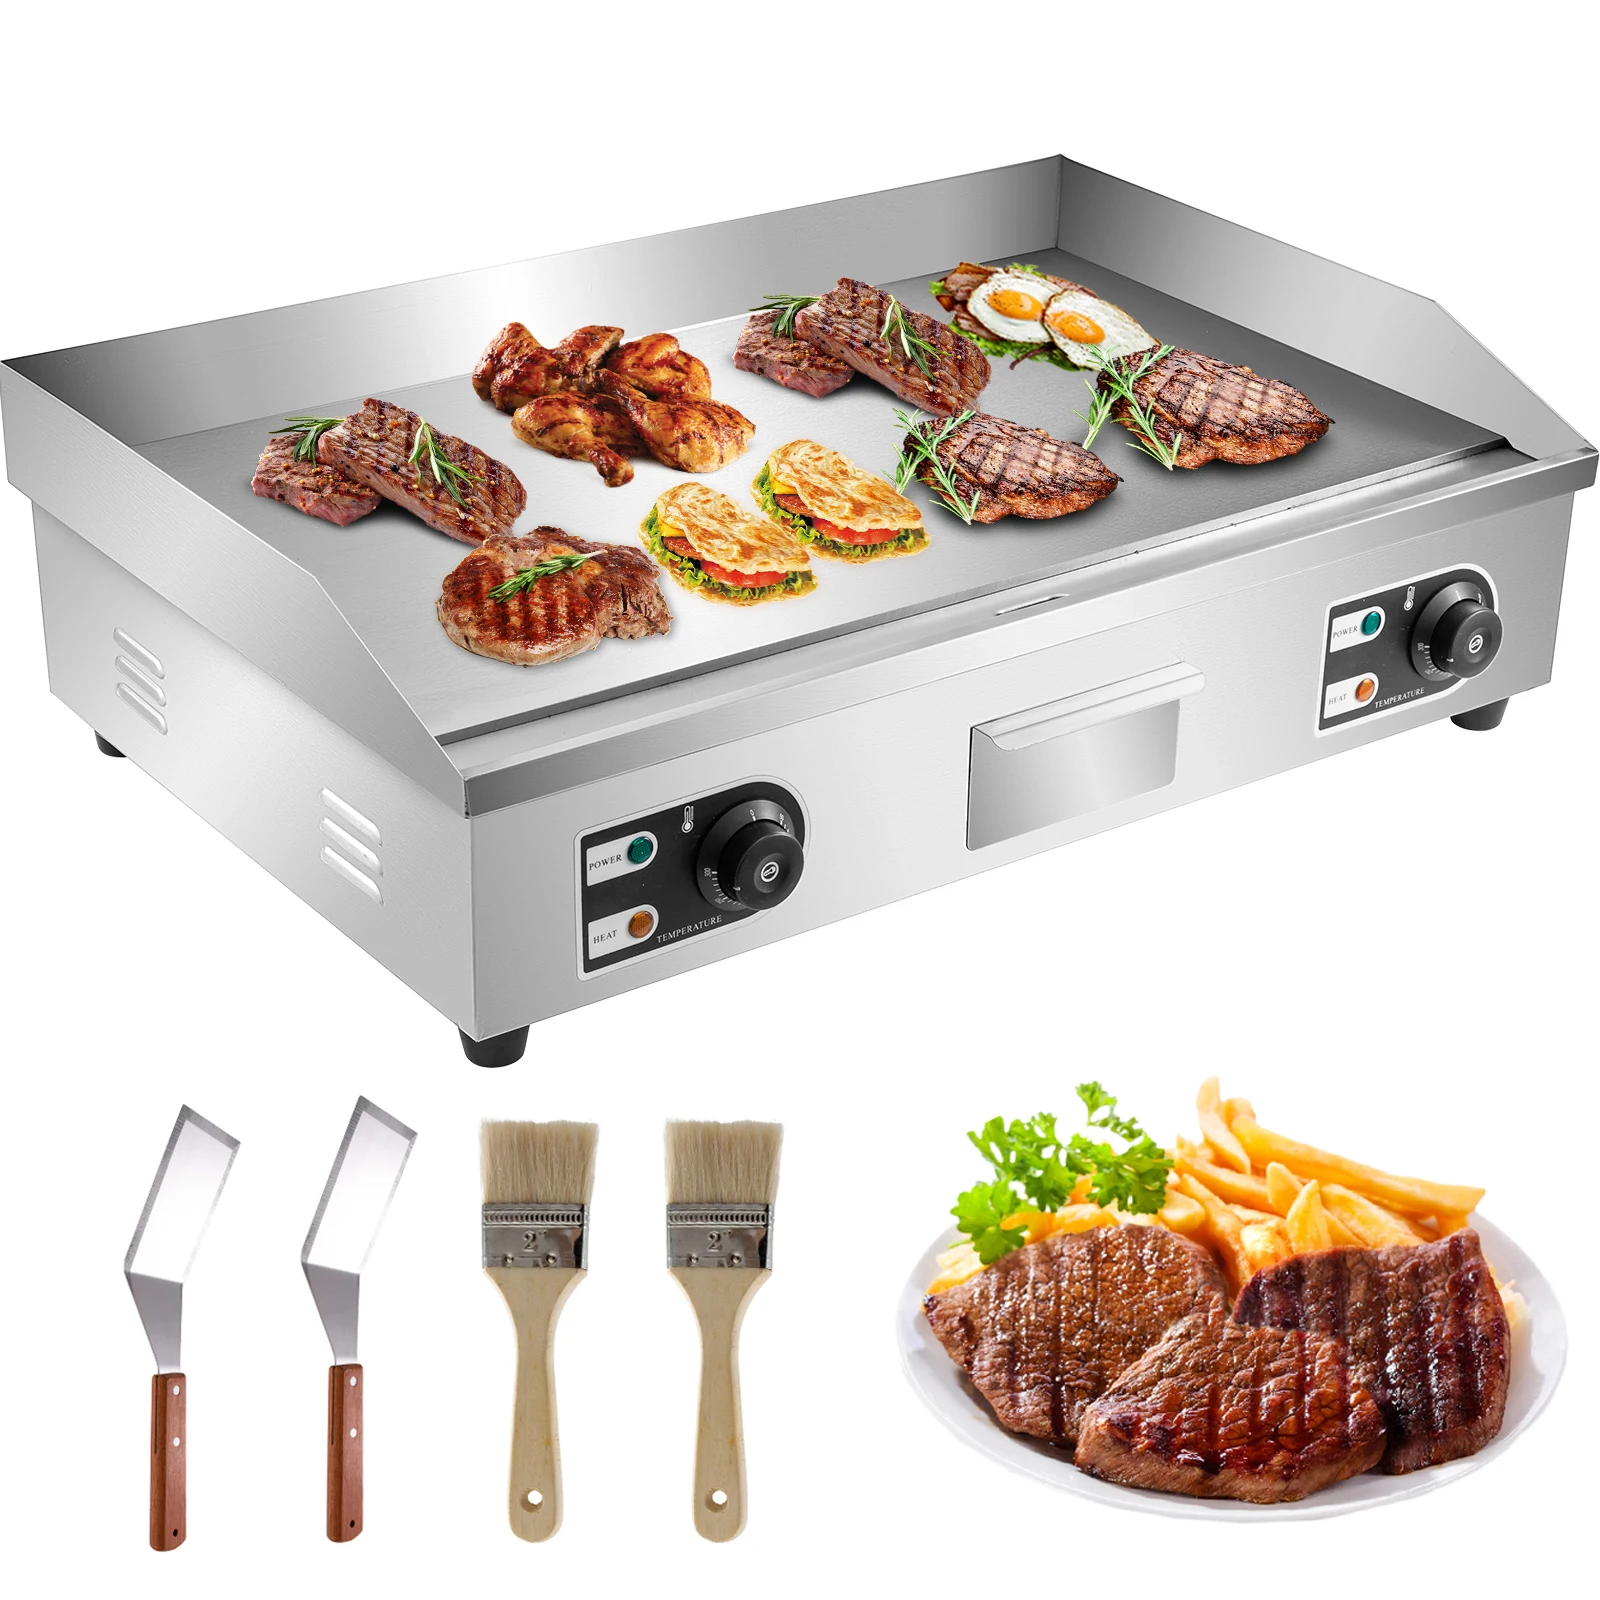 https://ae01.alicdn.com/kf/S36416fbf695240029da7dcf701354212G/VEVOR-Electric-Countertop-Griddle-with-Drawer-Stainless-Steel-Flat-Top-Grill-Barbecue-BBQ-machine-for-Outdoor.jpg